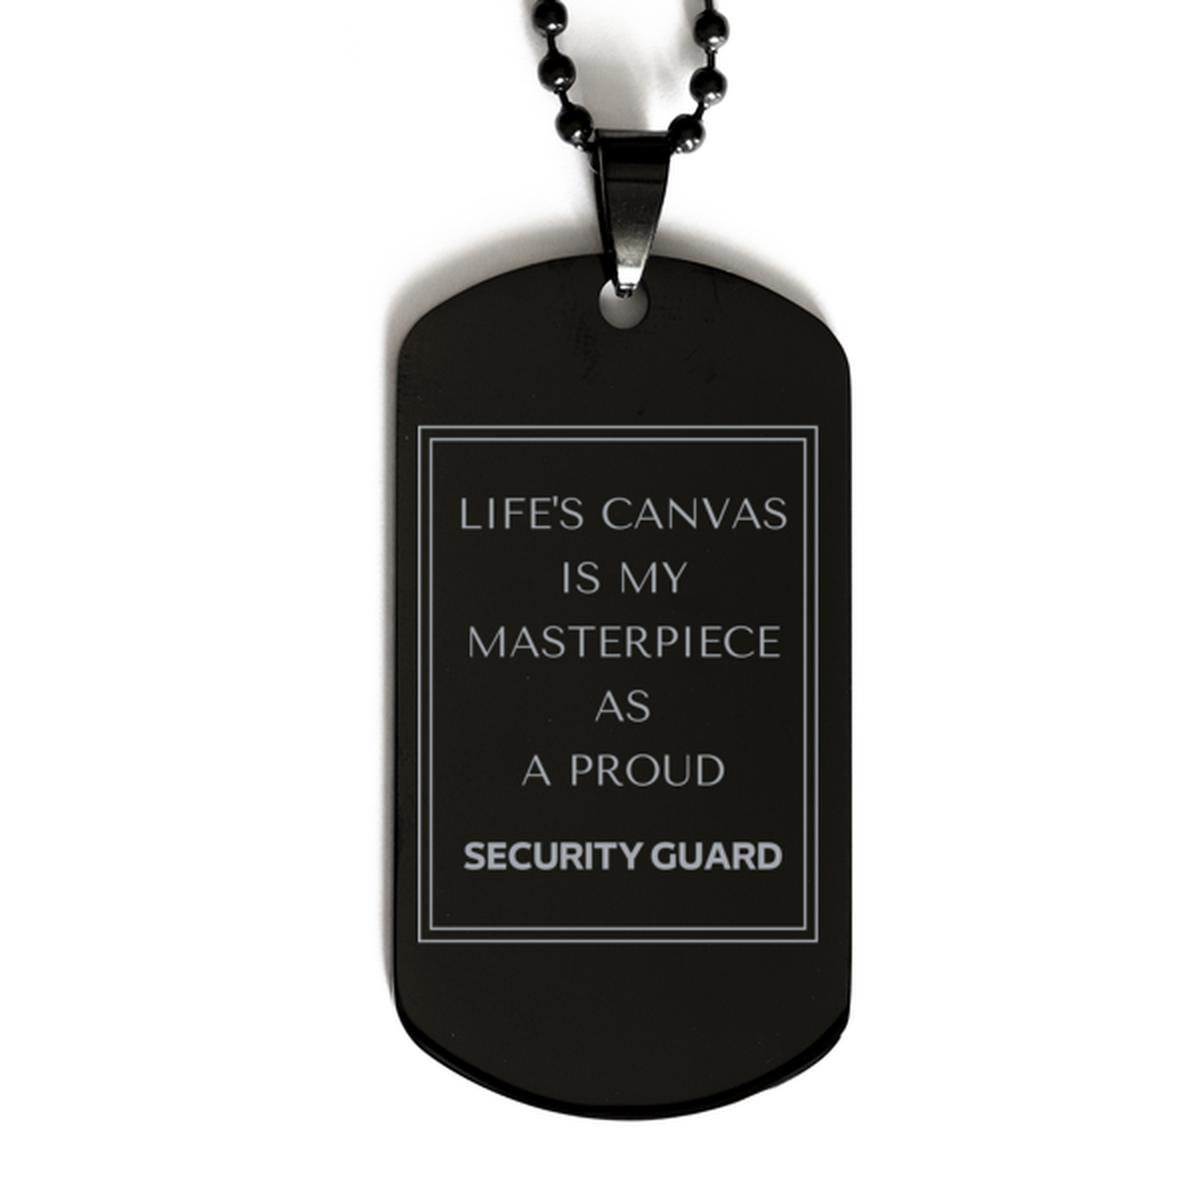 Proud Security Guard Gifts, Life's canvas is my masterpiece, Epic Birthday Christmas Unique Black Dog Tag For Security Guard, Coworkers, Men, Women, Friends